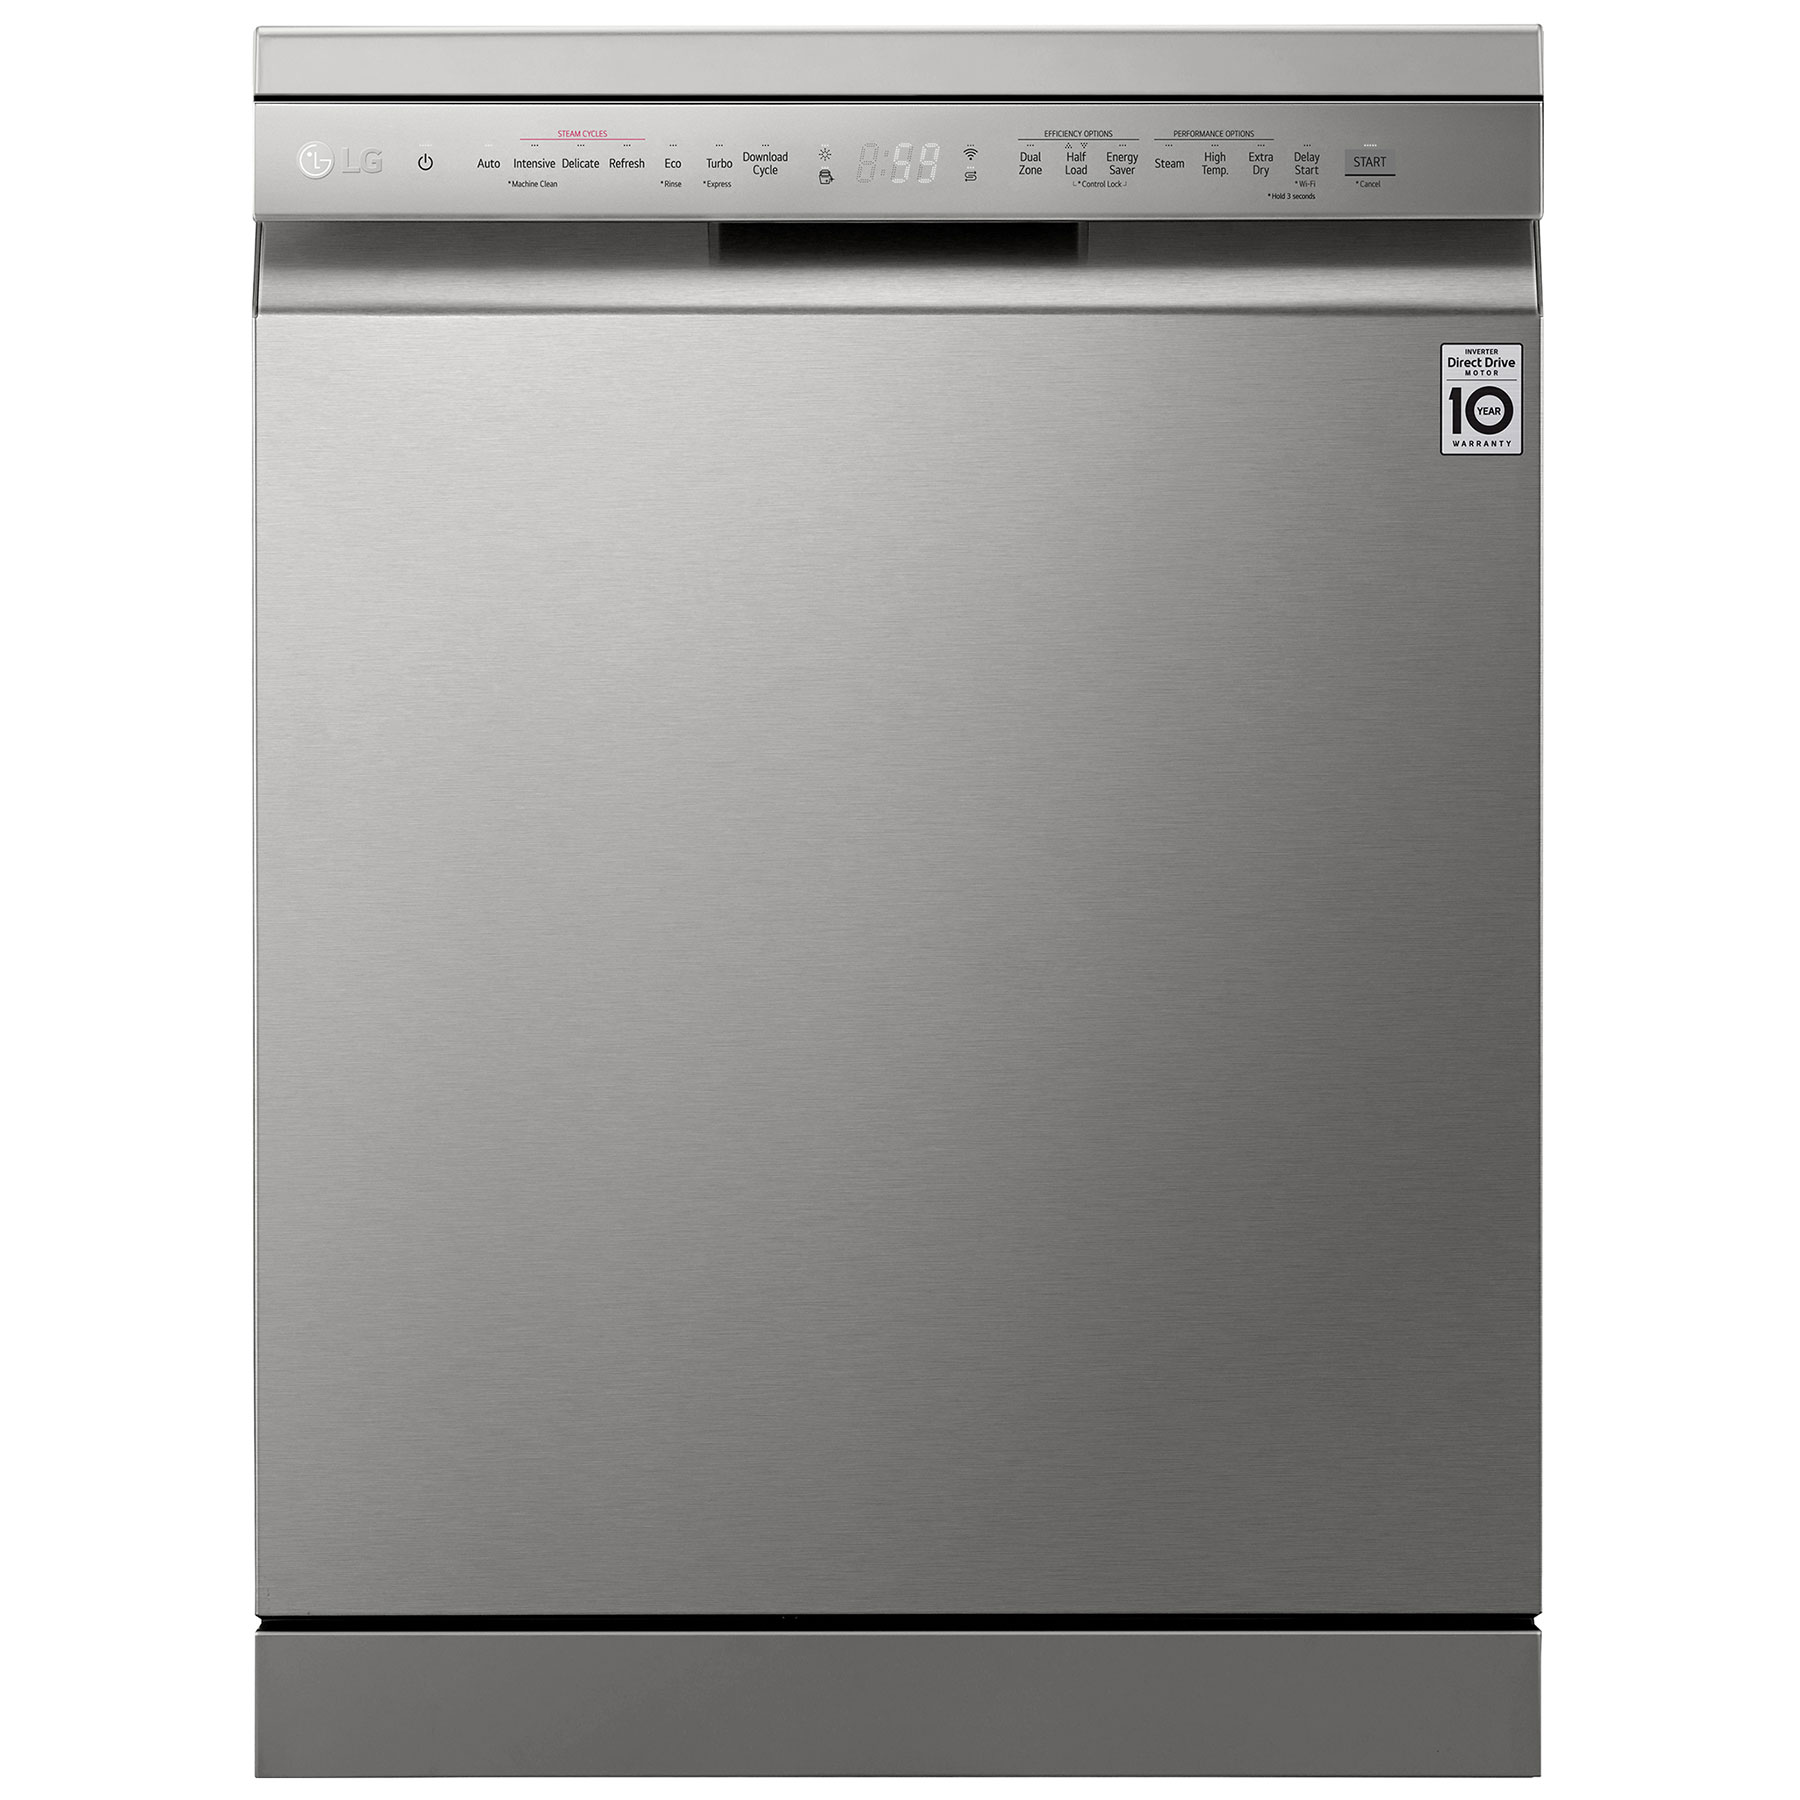 Image of LG DF222FPS 60cm Dishwasher St Steel 14 Place Setting E Rated Wi Fi